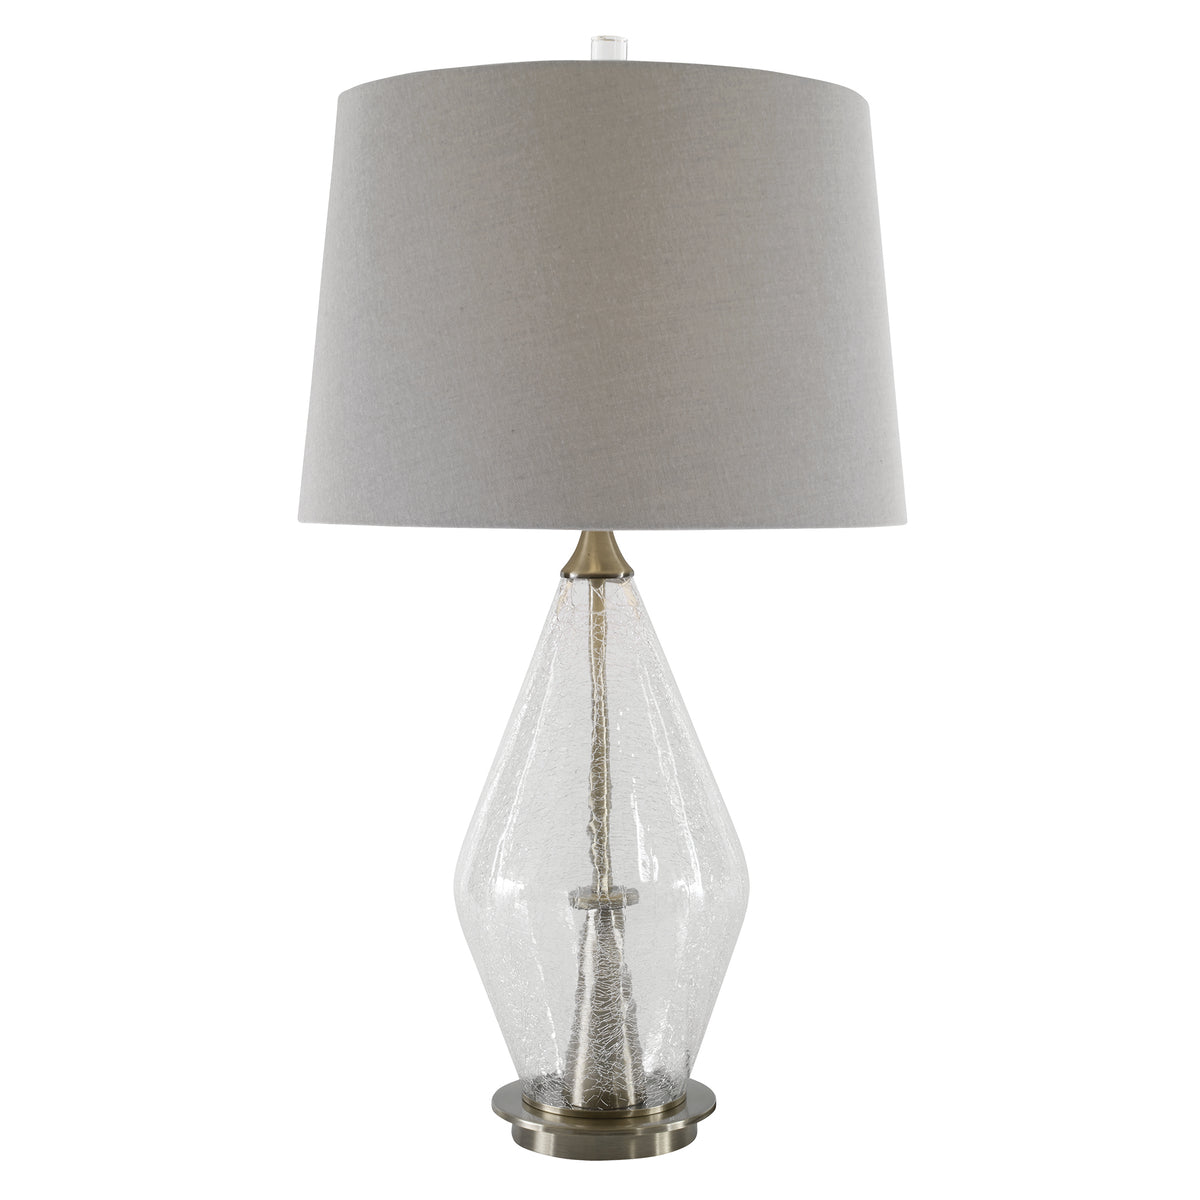 Uttermost Spezzano Crackled Glass Lamp